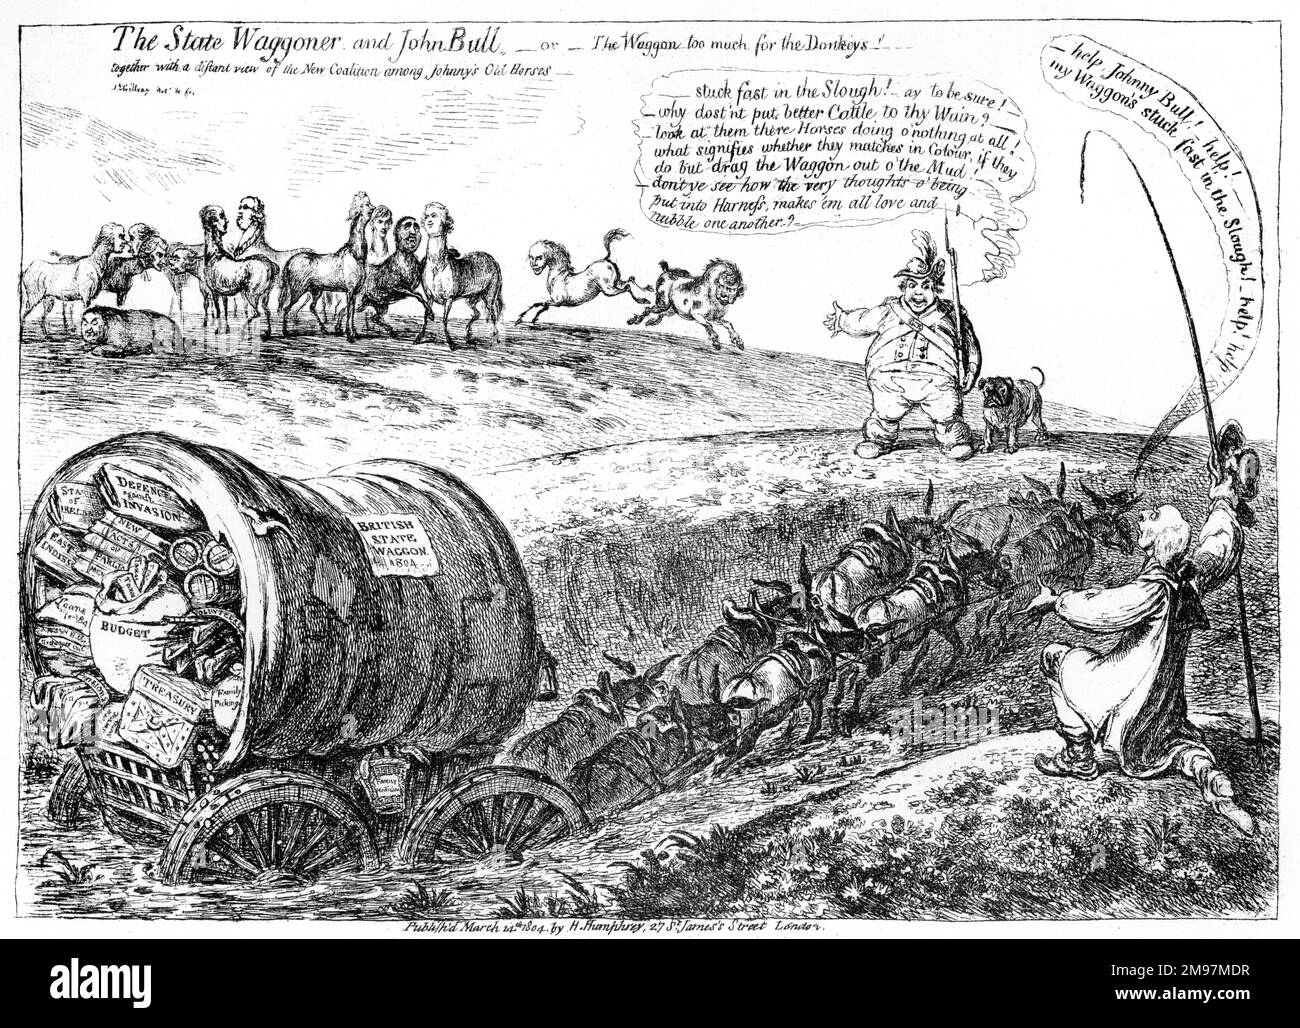 Cartoon, The State Waggoner and John Bull, or, the Waggon too much for the Donkeys!  together with a distant view of the New Coalition among Johnny's Old Horses, by James Gillray.  A satire on the ineffective Addington-led government, with the wagon of state bogged down in the mud, while out-of-office Tories and Whigs seem willing to form a coalition to take charge and put things right. Stock Photo